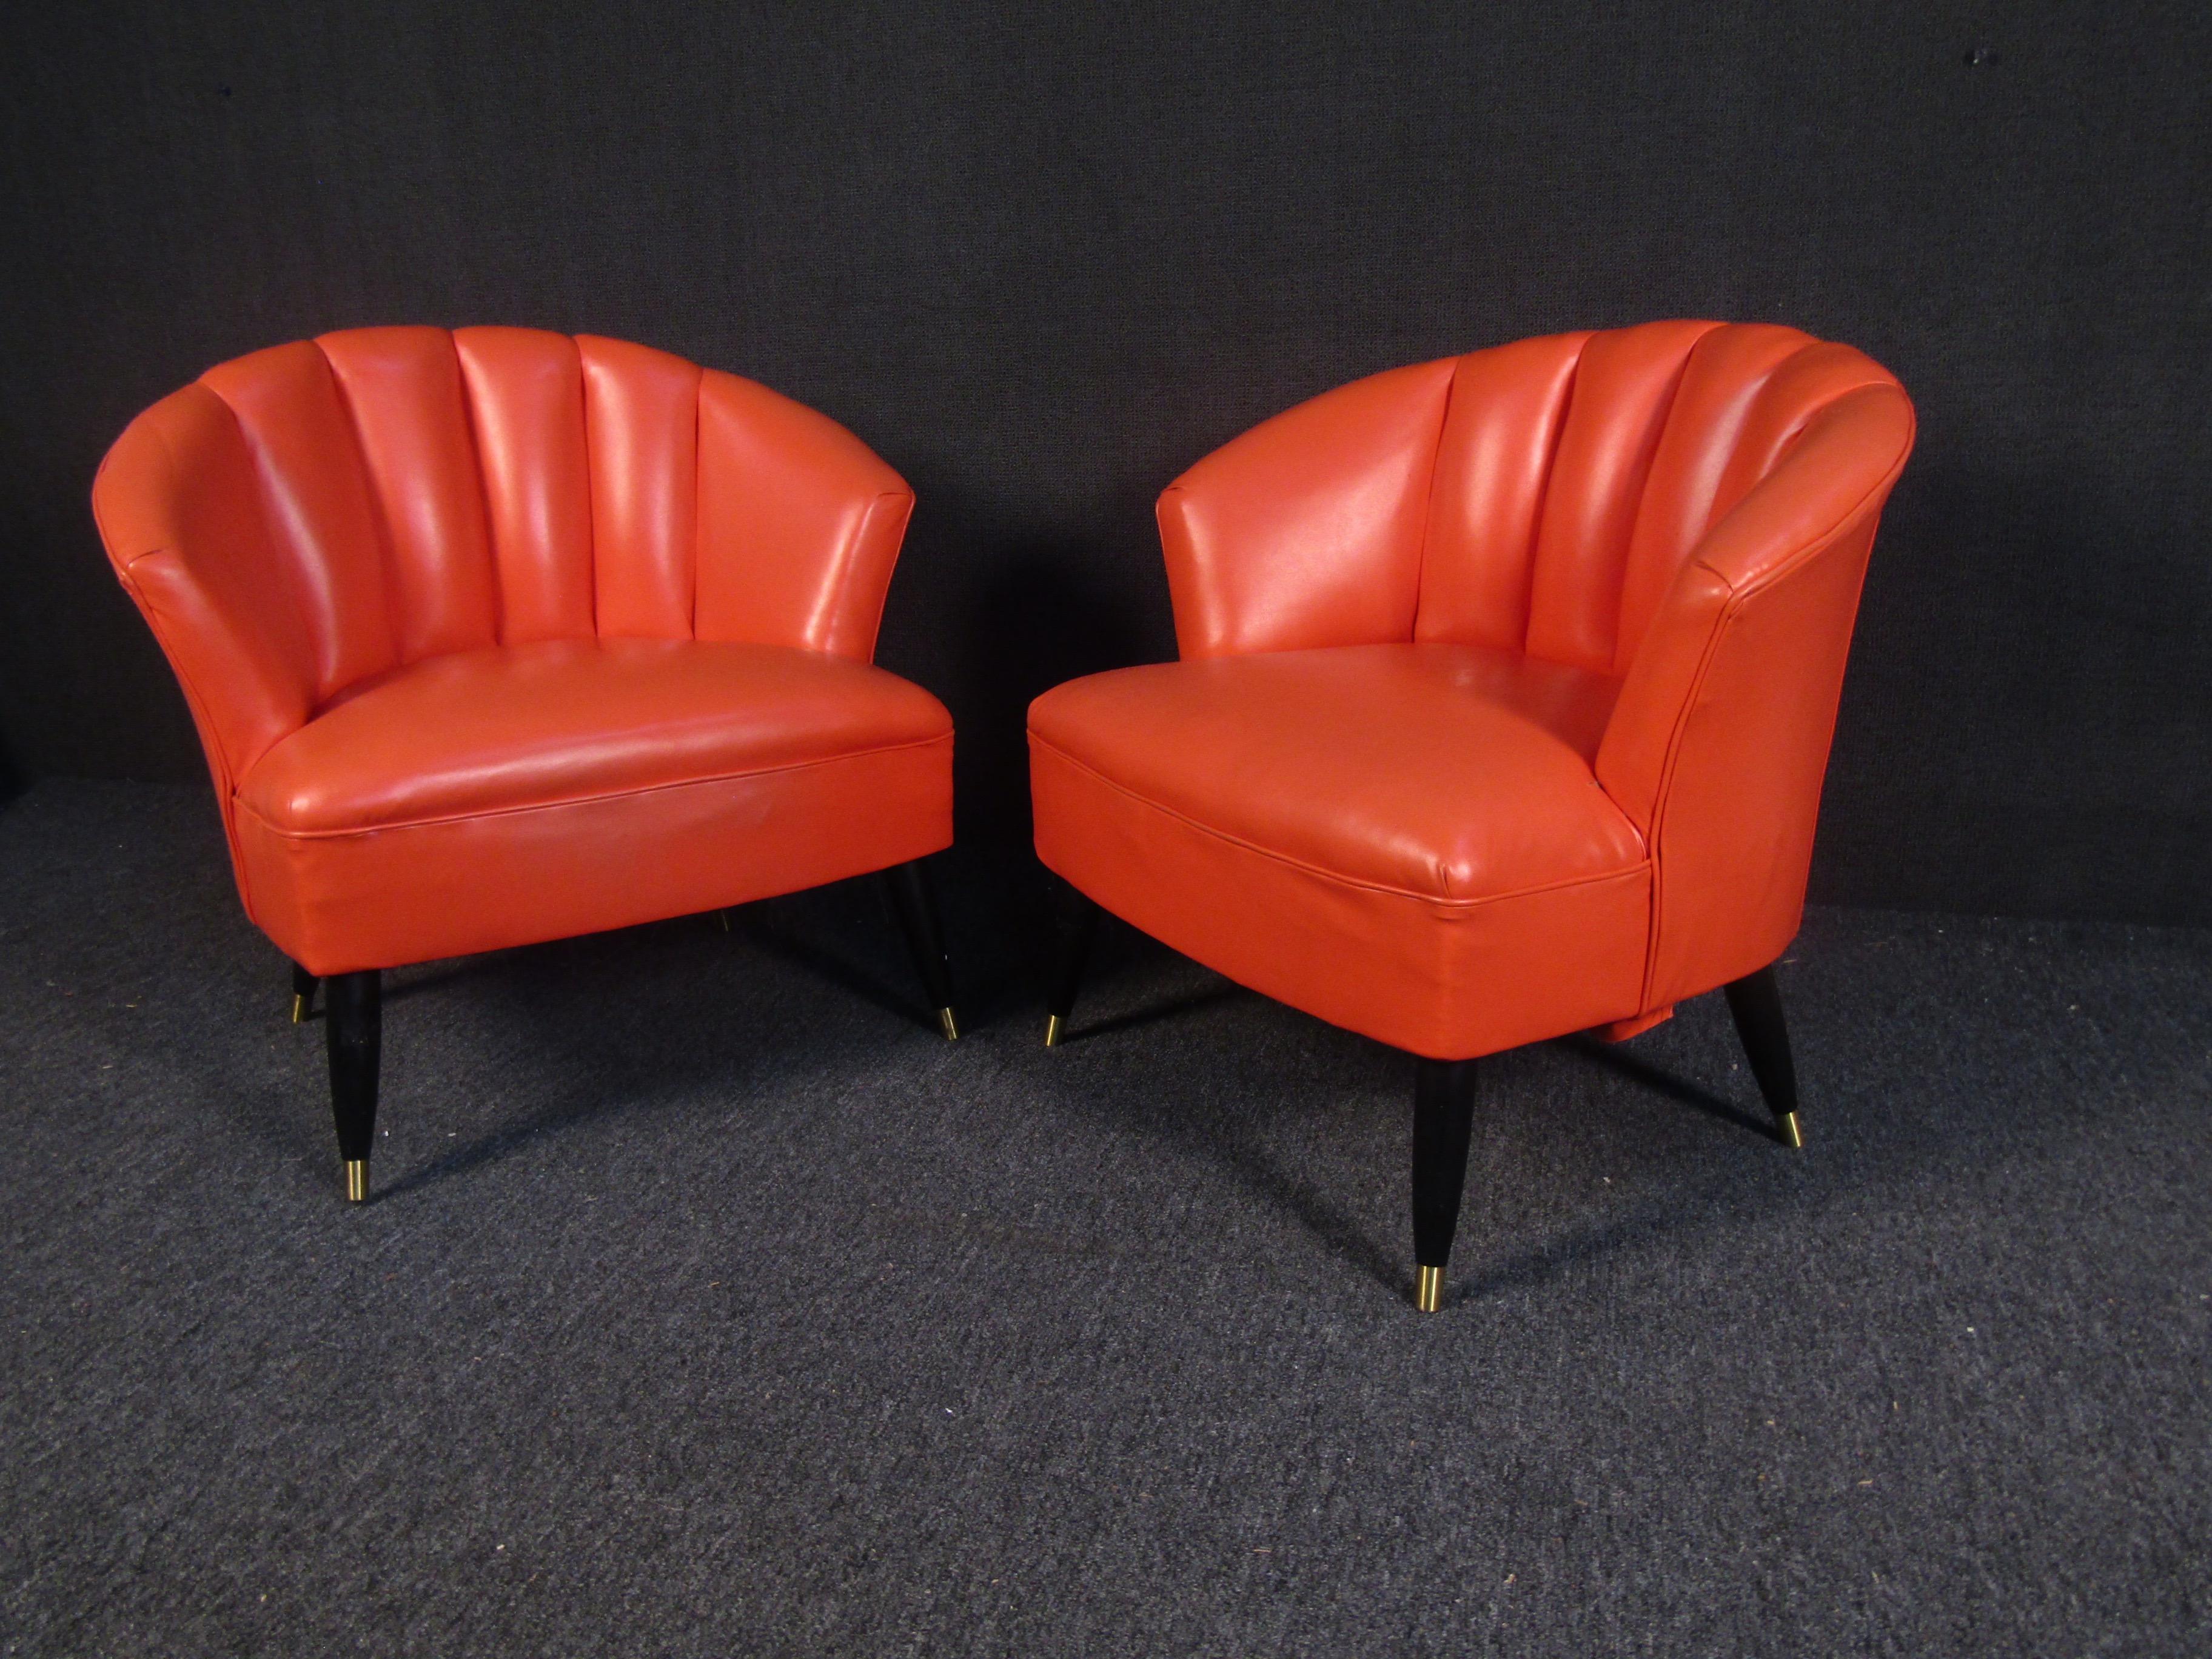 A stunning pair of midcentury style club chairs. This sleek and comfortable pair rests on tapered wooden legs. An oyster-shell design with elegant coral Naugahyde makes these perfect for any setting. This stunning pair of contemporary lounge chairs